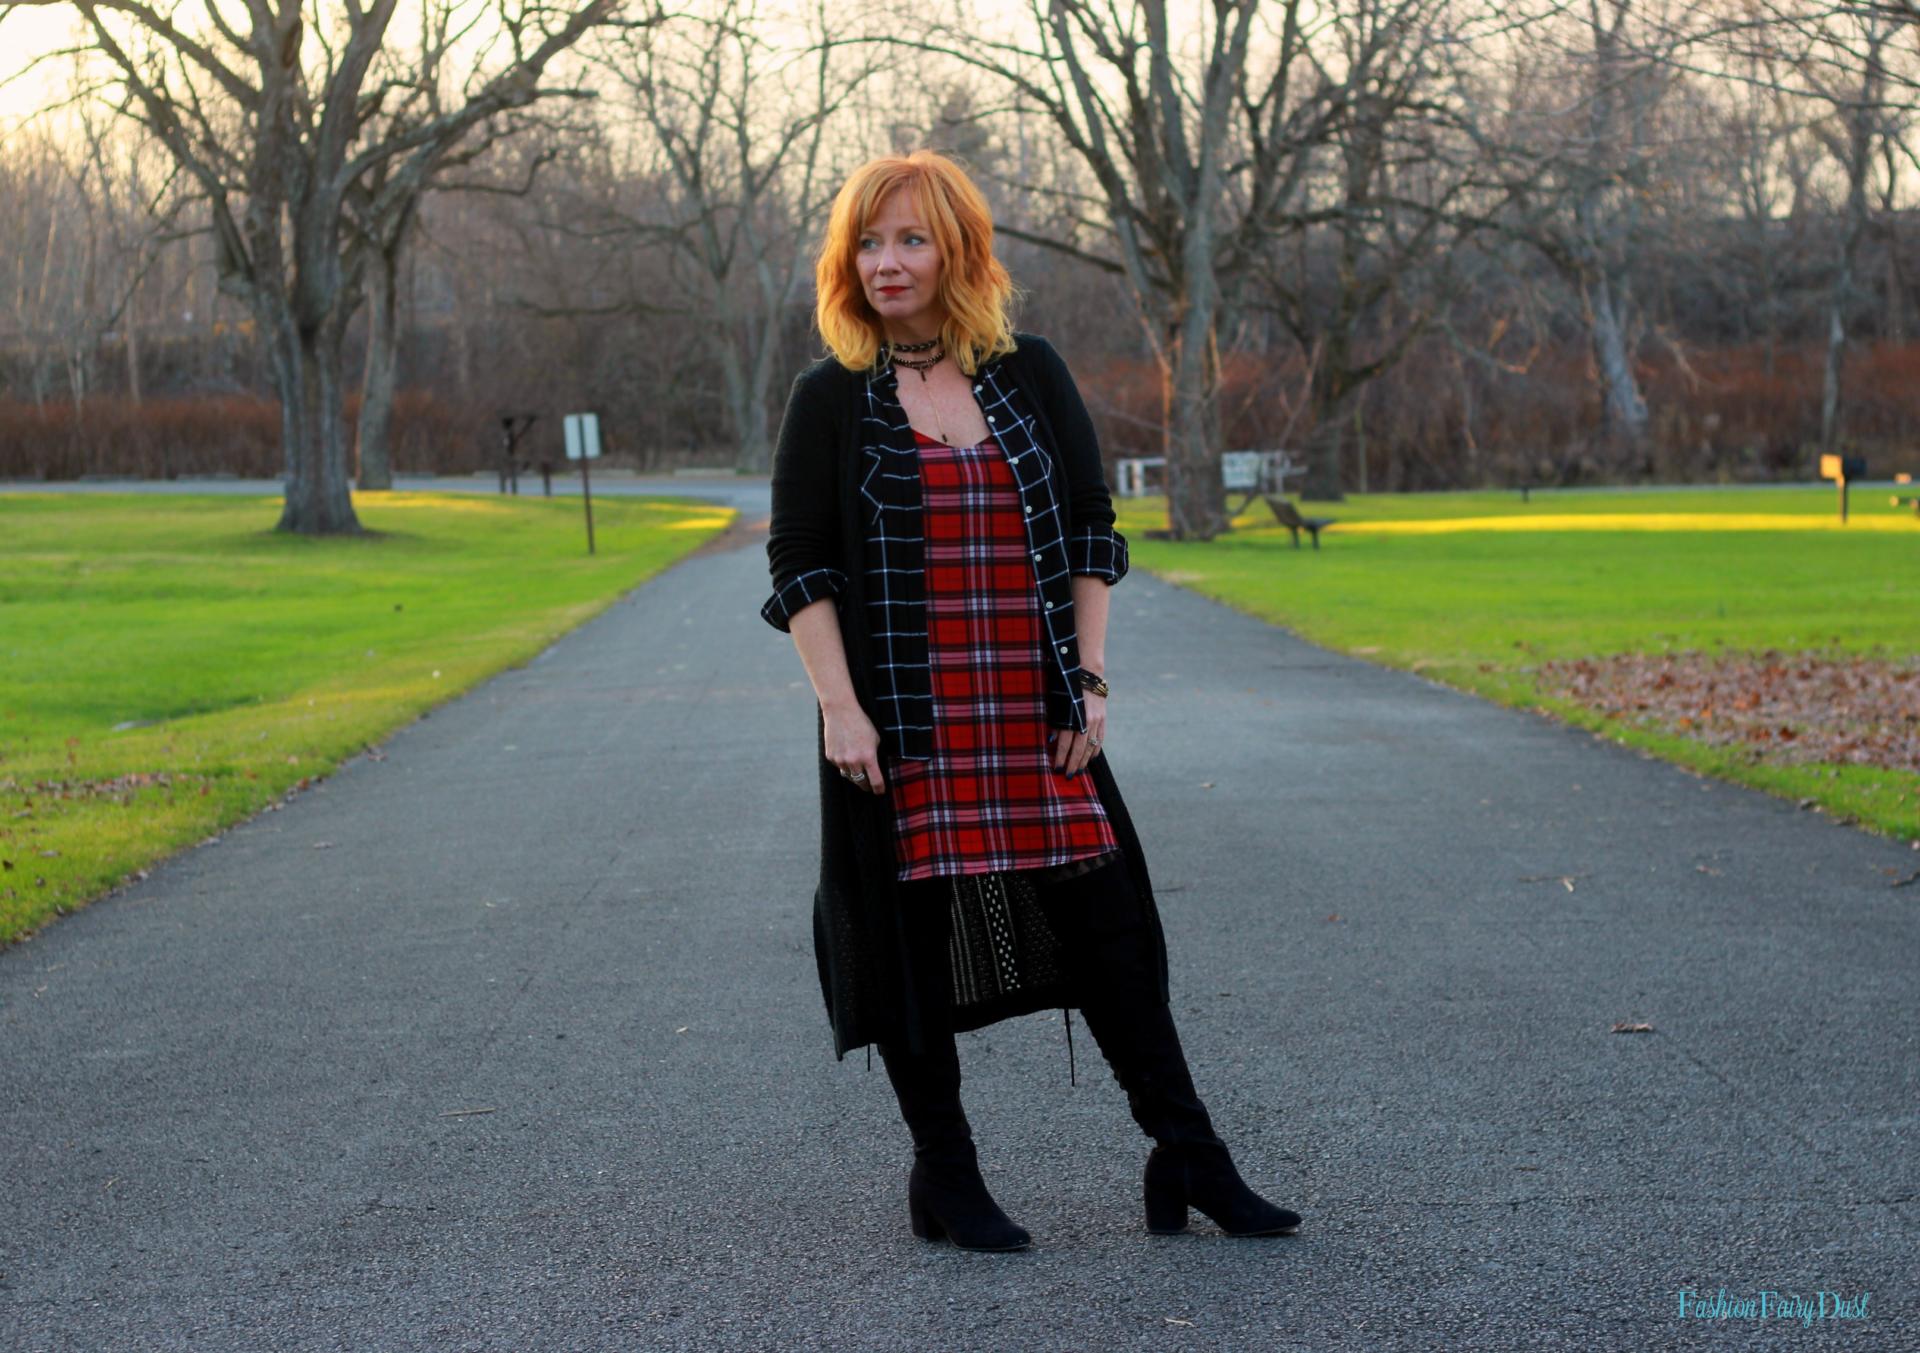 Plaid slip dress, black over the knee boots, black duster. How to mix plaids.